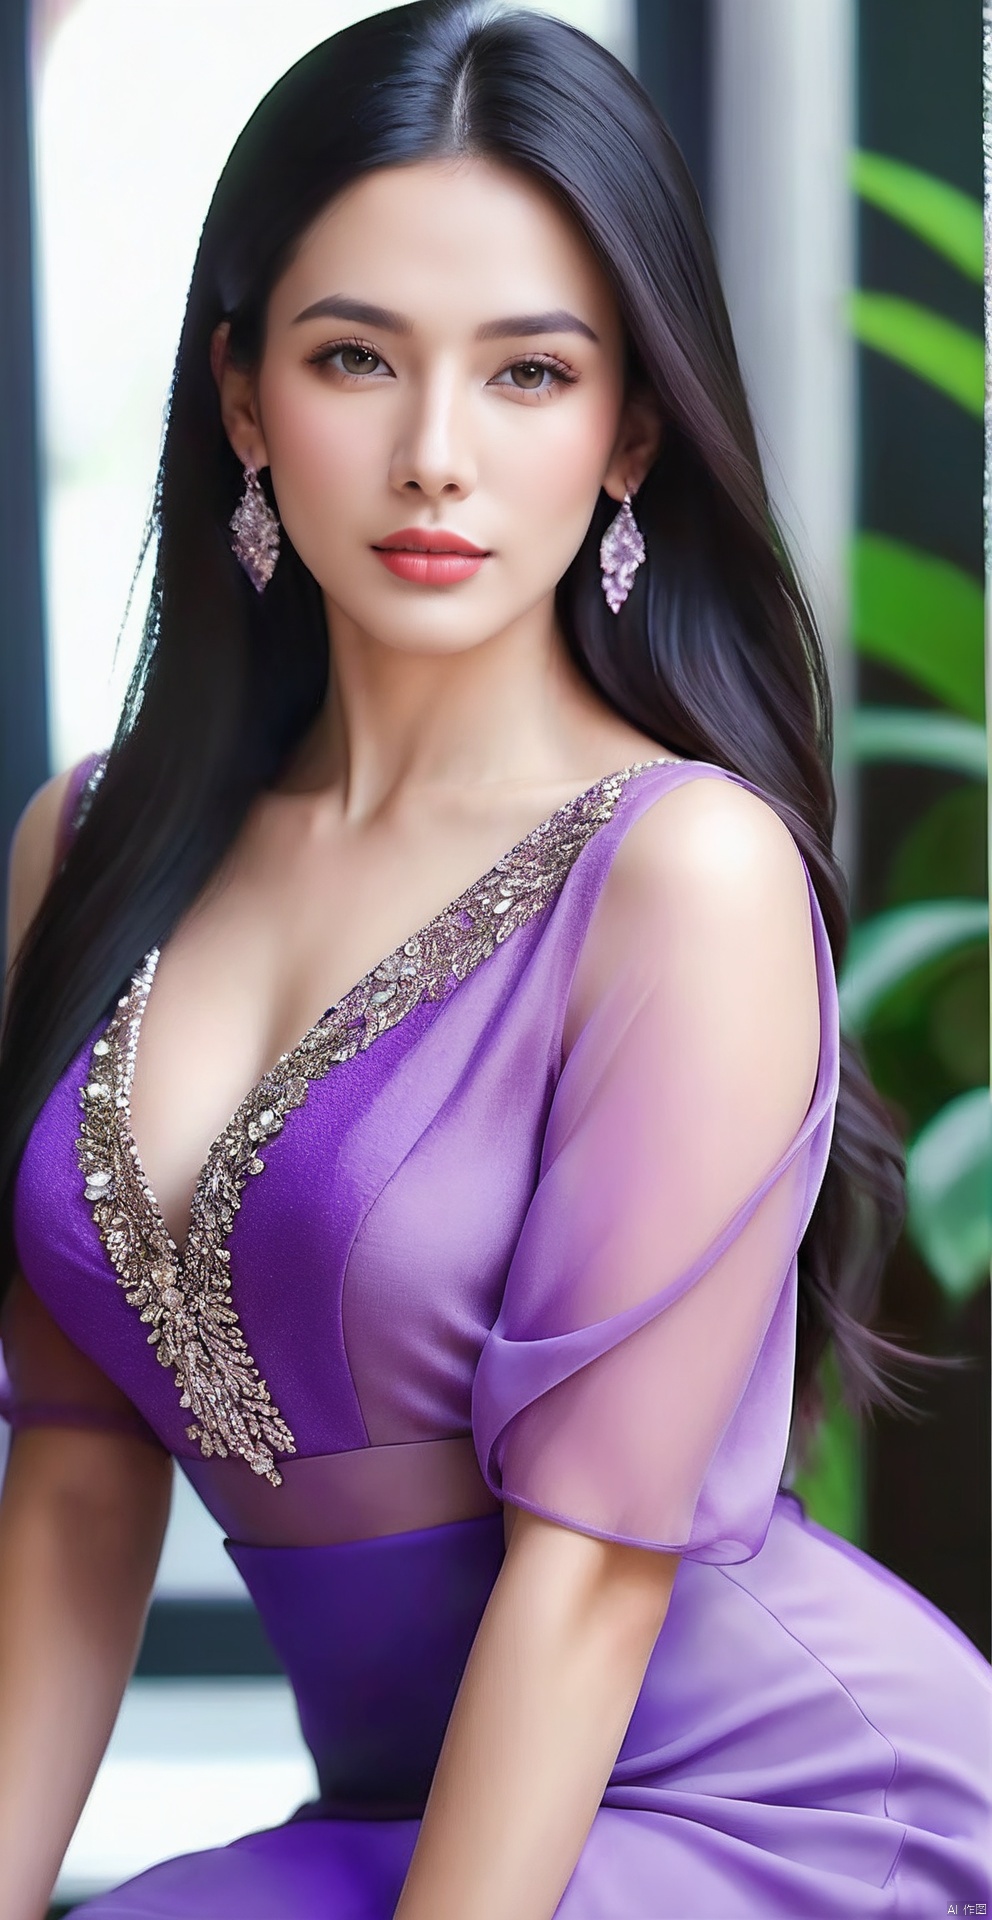 8k,RAW, Fujifilm XT3, masterpiece, best quality, photorealistic of 1girl ,solo, diamond stud earrings, long straight black hair, hazel eyes, serious expression, slender figure, wearing a purple blouse,masterpiece,1girl,purple dress,(upper body shot), (full body view),best quality,long hair, black hair,purple transparent shawl,earrings,beautiful symmetrical face,in the style of elegant clothing,skin white and smooth,high heels,g009,g010,